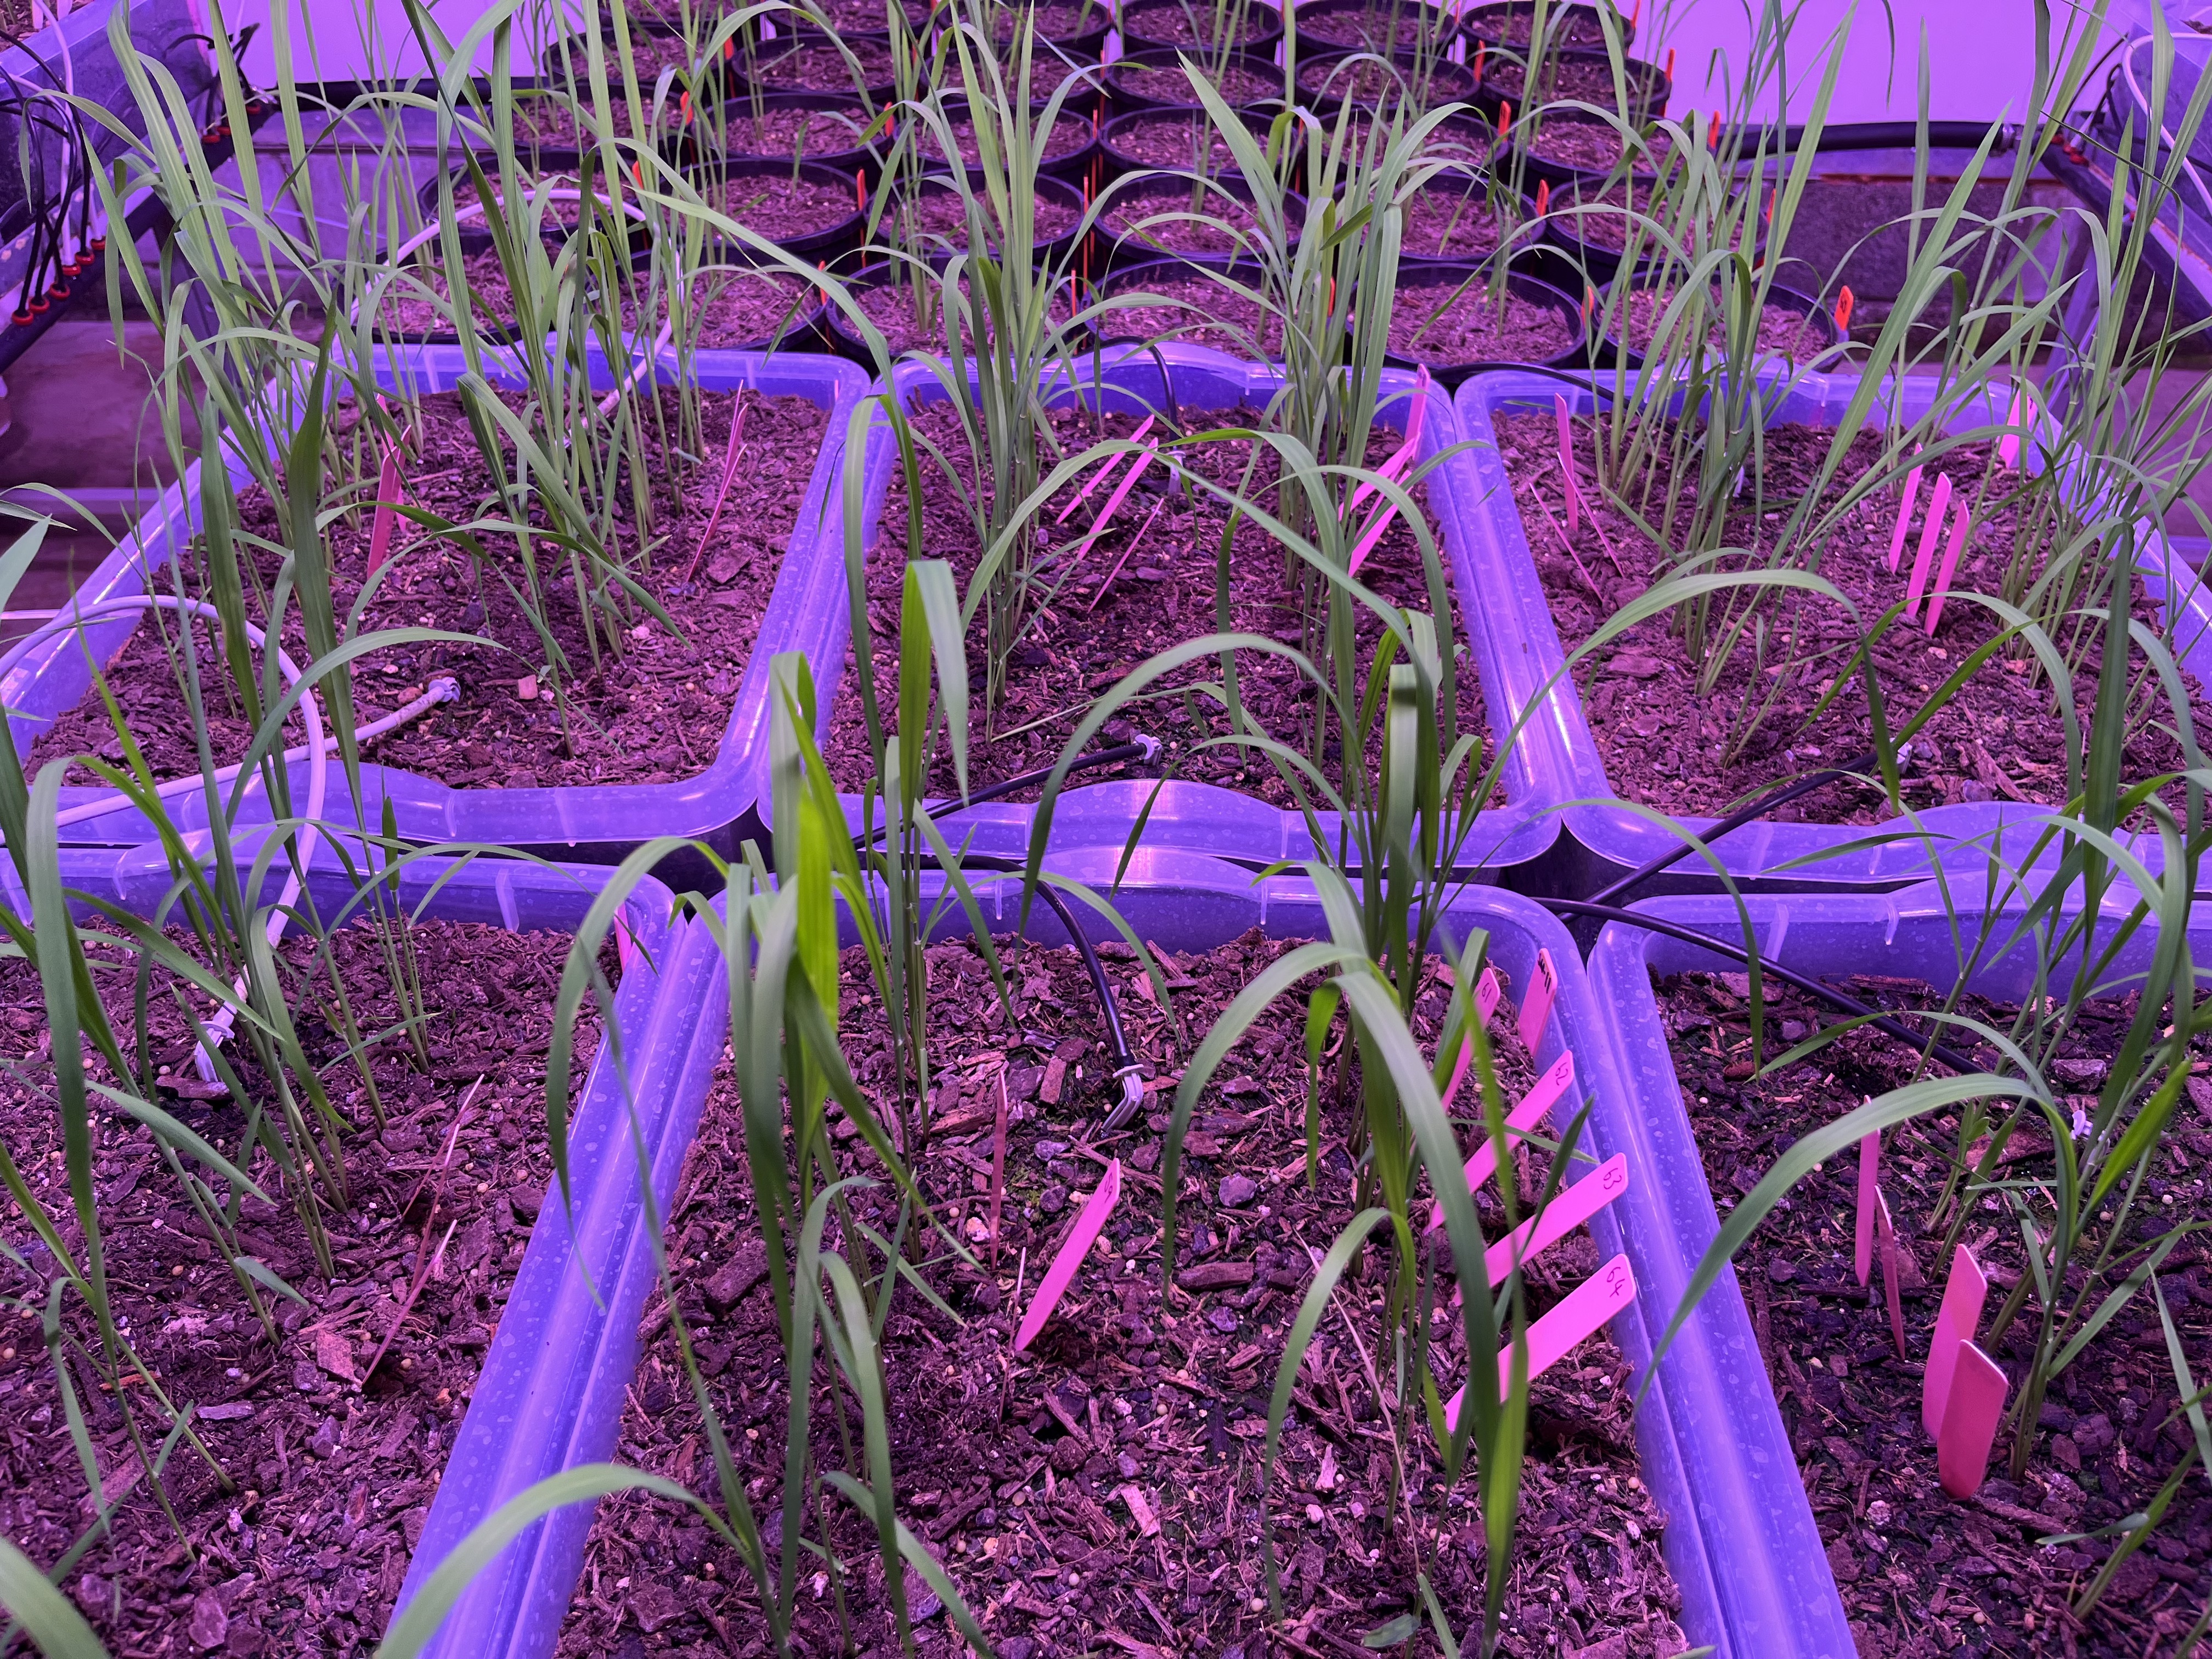 Direct Dry Seeded Rice seedlings in BioLumic lab testing productivity gains after treating seeds with UV light exposure.